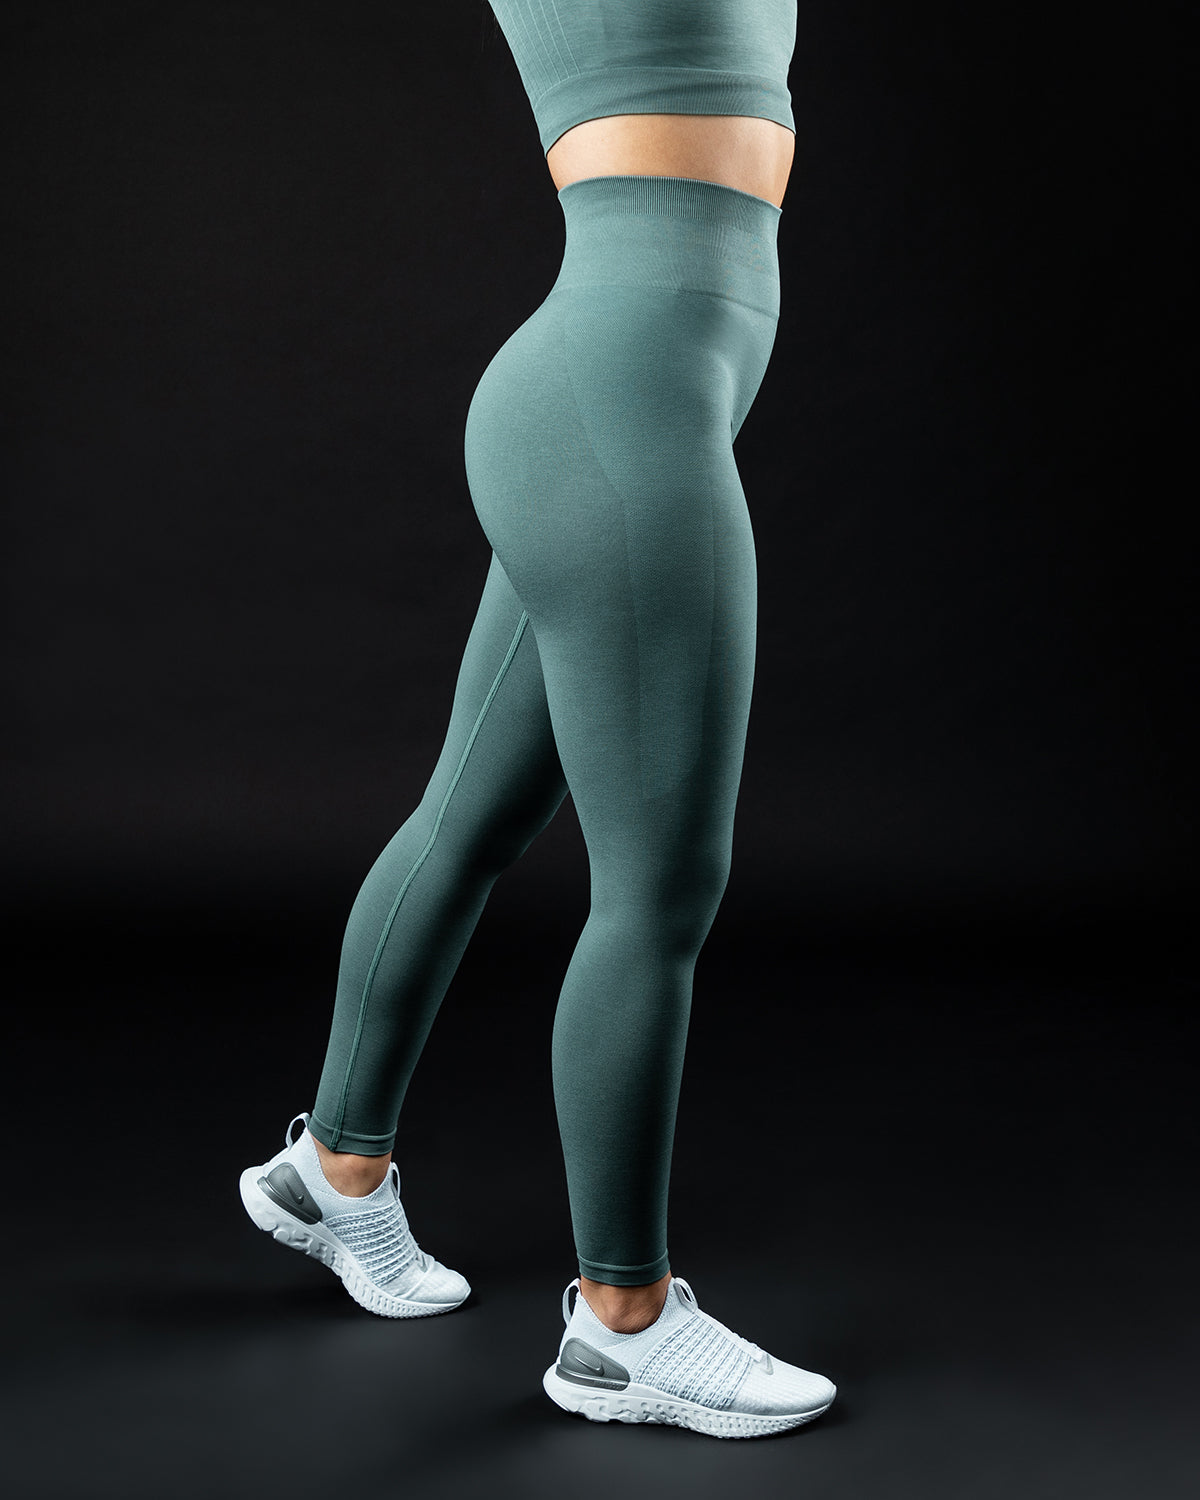 Alphalete Amplify Leggings Xs  International Society of Precision  Agriculture